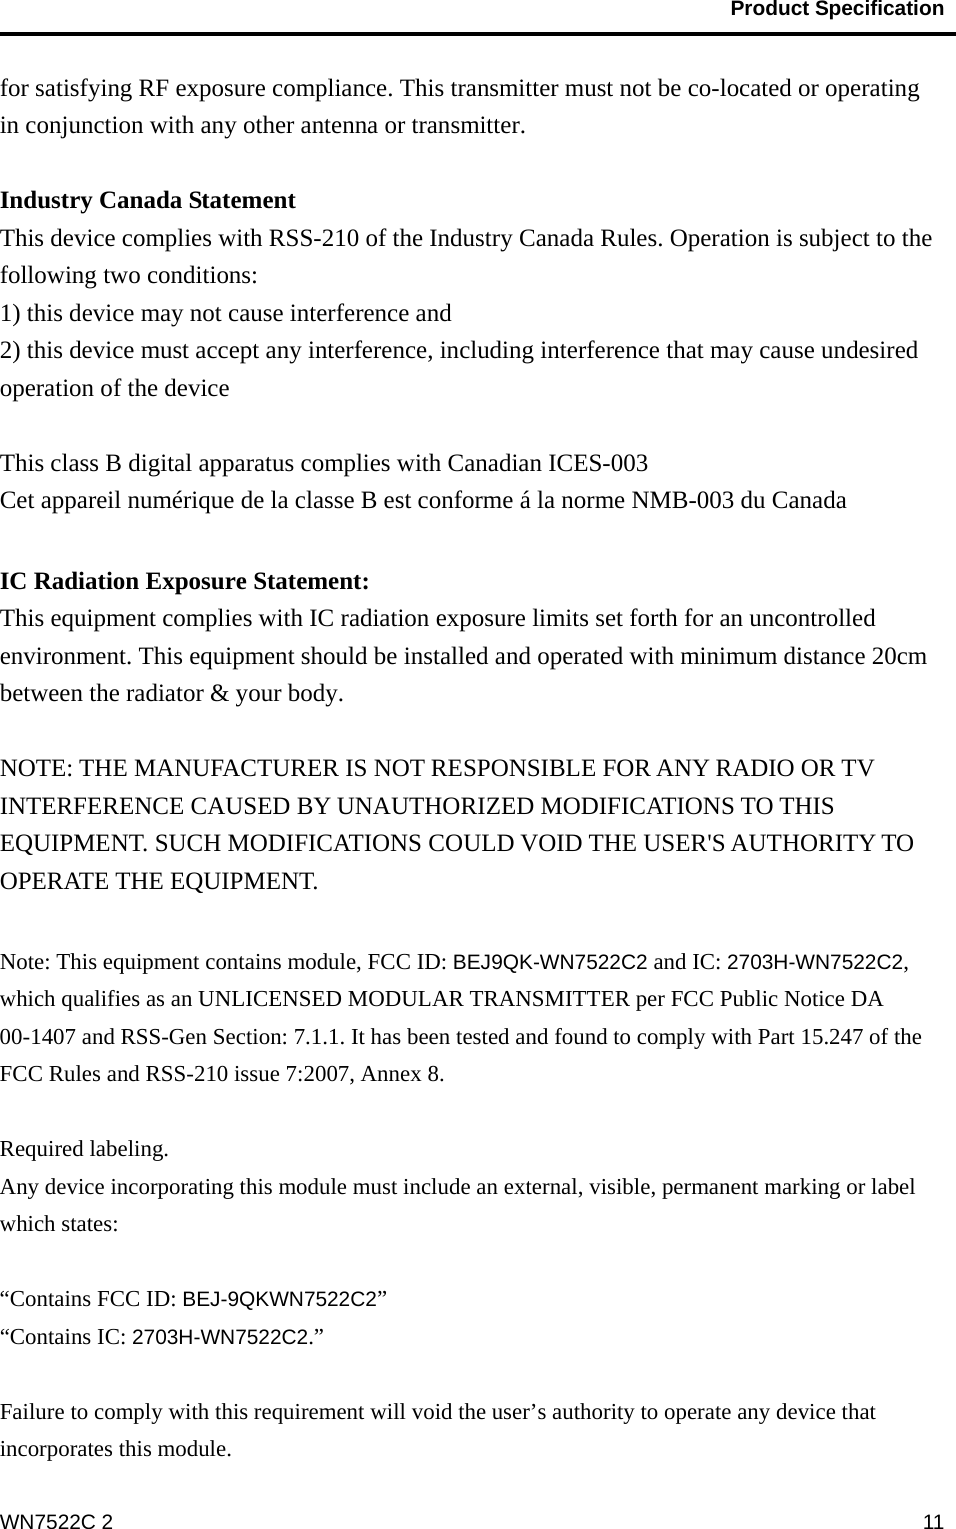                                           Product Specification                                              WN7522C 2  11for satisfying RF exposure compliance. This transmitter must not be co-located or operating in conjunction with any other antenna or transmitter.  Industry Canada Statement This device complies with RSS-210 of the Industry Canada Rules. Operation is subject to the following two conditions: 1) this device may not cause interference and 2) this device must accept any interference, including interference that may cause undesired operation of the device  This class B digital apparatus complies with Canadian ICES-003   Cet appareil numérique de la classe B est conforme á la norme NMB-003 du Canada  IC Radiation Exposure Statement: This equipment complies with IC radiation exposure limits set forth for an uncontrolled environment. This equipment should be installed and operated with minimum distance 20cm between the radiator &amp; your body.  NOTE: THE MANUFACTURER IS NOT RESPONSIBLE FOR ANY RADIO OR TV INTERFERENCE CAUSED BY UNAUTHORIZED MODIFICATIONS TO THIS EQUIPMENT. SUCH MODIFICATIONS COULD VOID THE USER&apos;S AUTHORITY TO OPERATE THE EQUIPMENT.  Note: This equipment contains module, FCC ID: BEJ9QK-WN7522C2 and IC: 2703H-WN7522C2, which qualifies as an UNLICENSED MODULAR TRANSMITTER per FCC Public Notice DA 00-1407 and RSS-Gen Section: 7.1.1. It has been tested and found to comply with Part 15.247 of the FCC Rules and RSS-210 issue 7:2007, Annex 8.    Required labeling. Any device incorporating this module must include an external, visible, permanent marking or label which states:  “Contains FCC ID: BEJ-9QKWN7522C2” “Contains IC: 2703H-WN7522C2.”  Failure to comply with this requirement will void the user’s authority to operate any device that incorporates this module. 